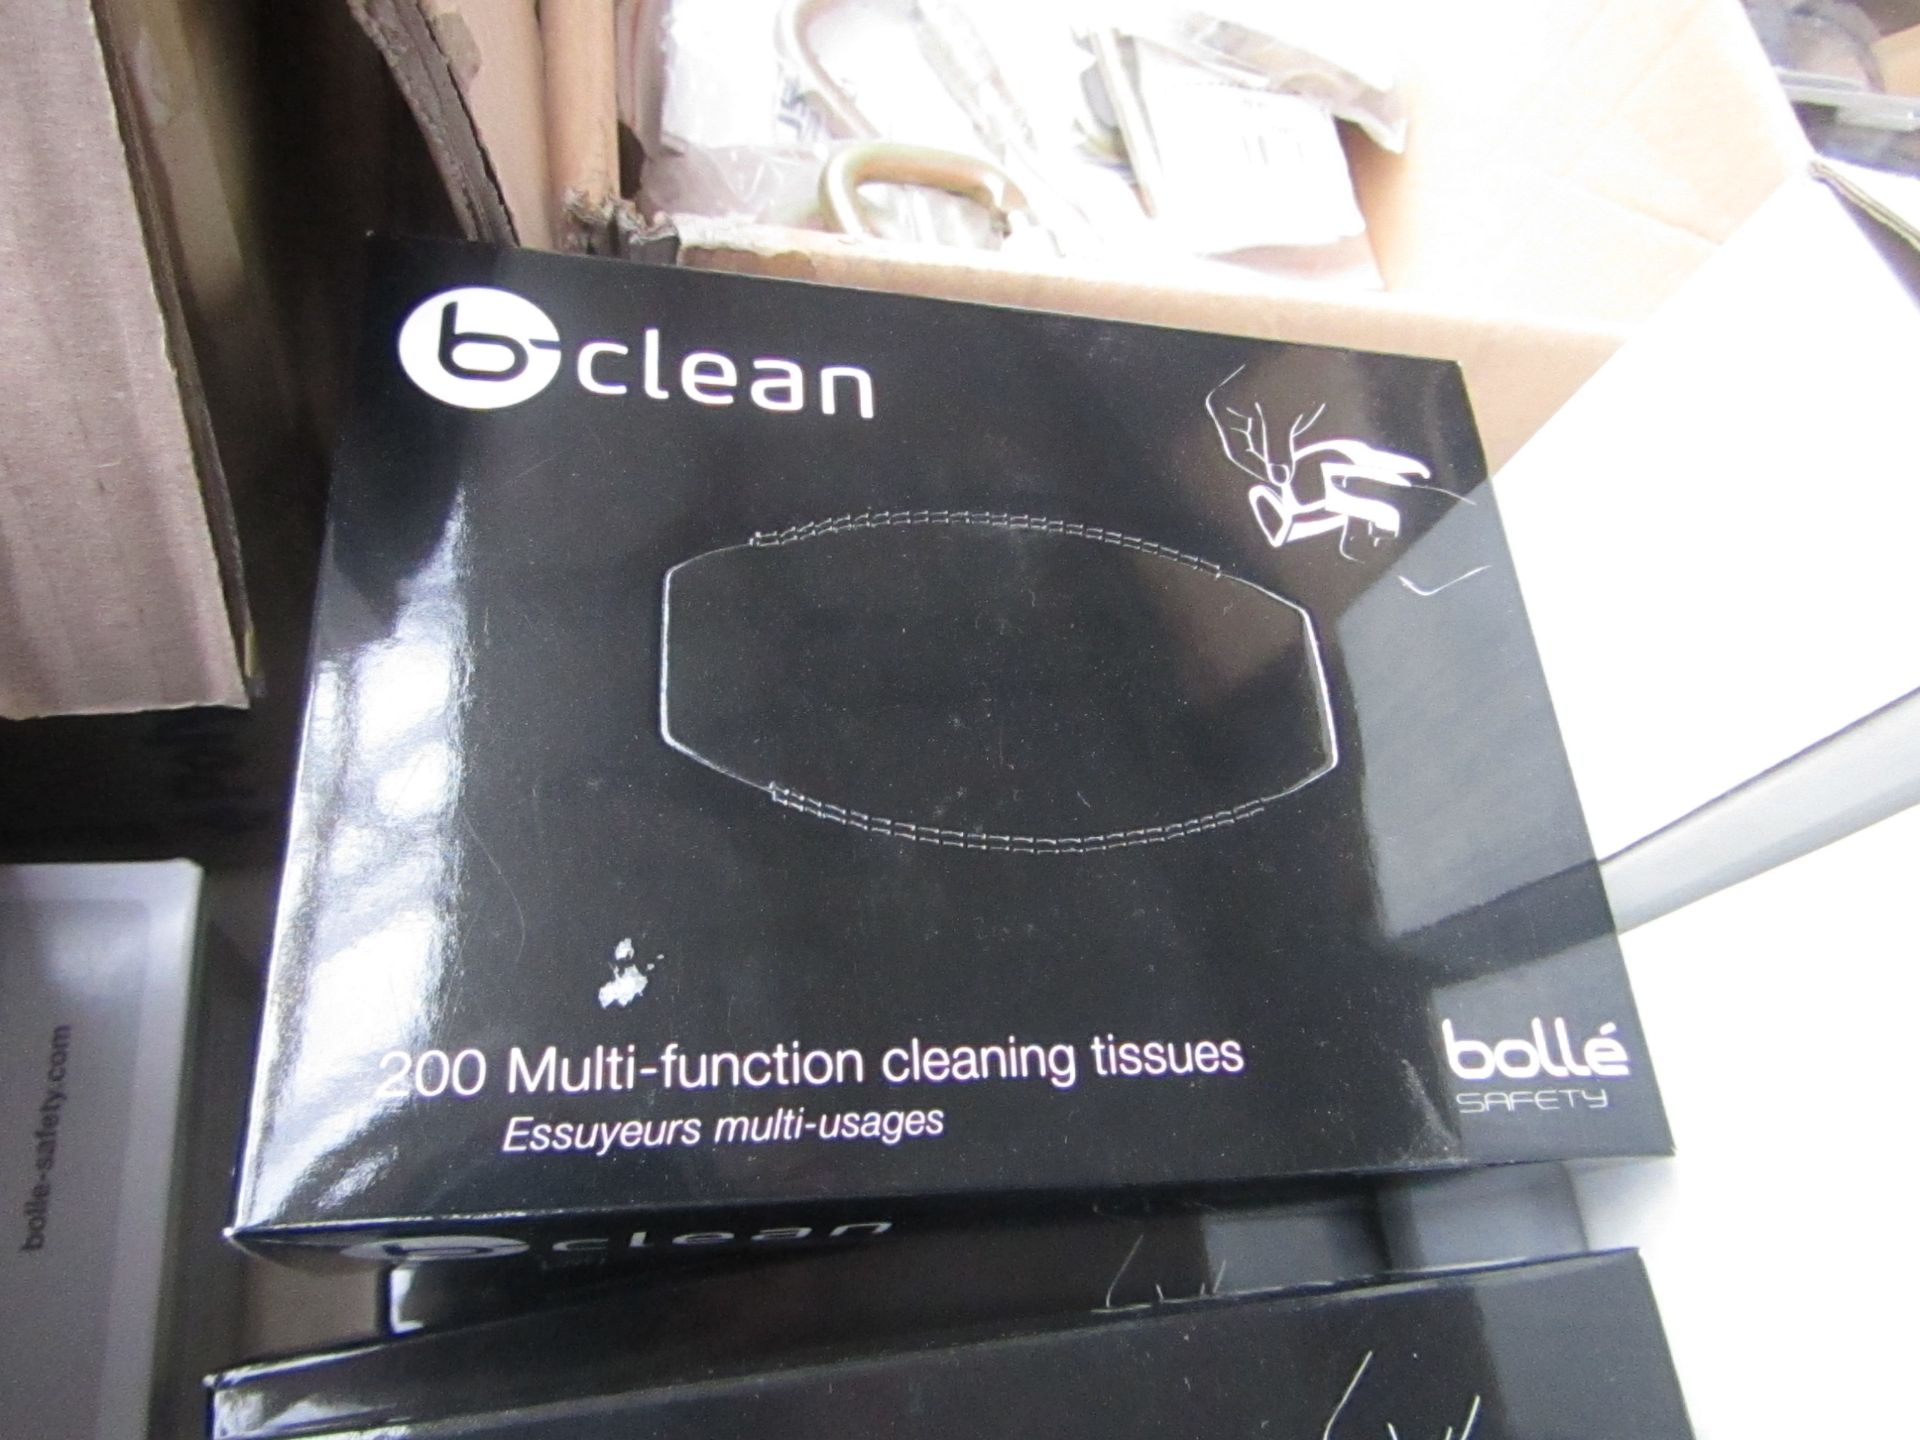 4 x Boxes of B-Clean B401 200 multi-function dry cleaning tissues, new RRP £7.00 Each